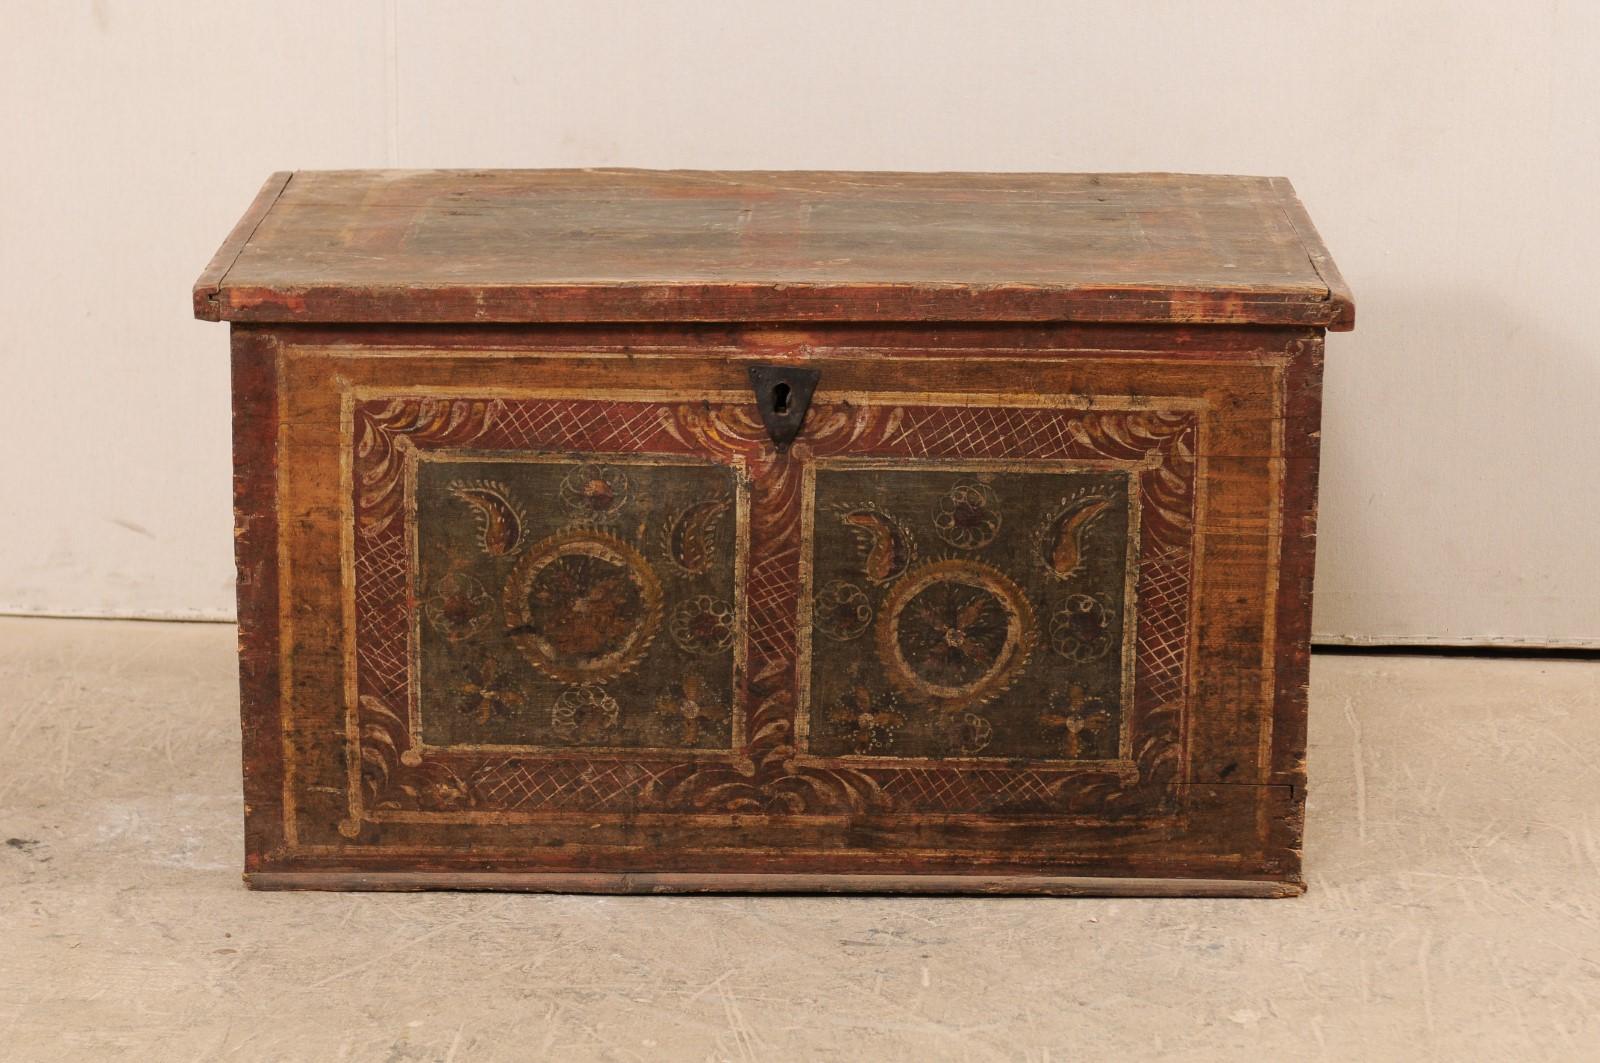 A European storage chest from the 19th century. This antique trunk, with it's rectangular-shaped body, features it's original hand painted decorations about the top front sides in a paisley and foliage motif within framed squares, and it's original